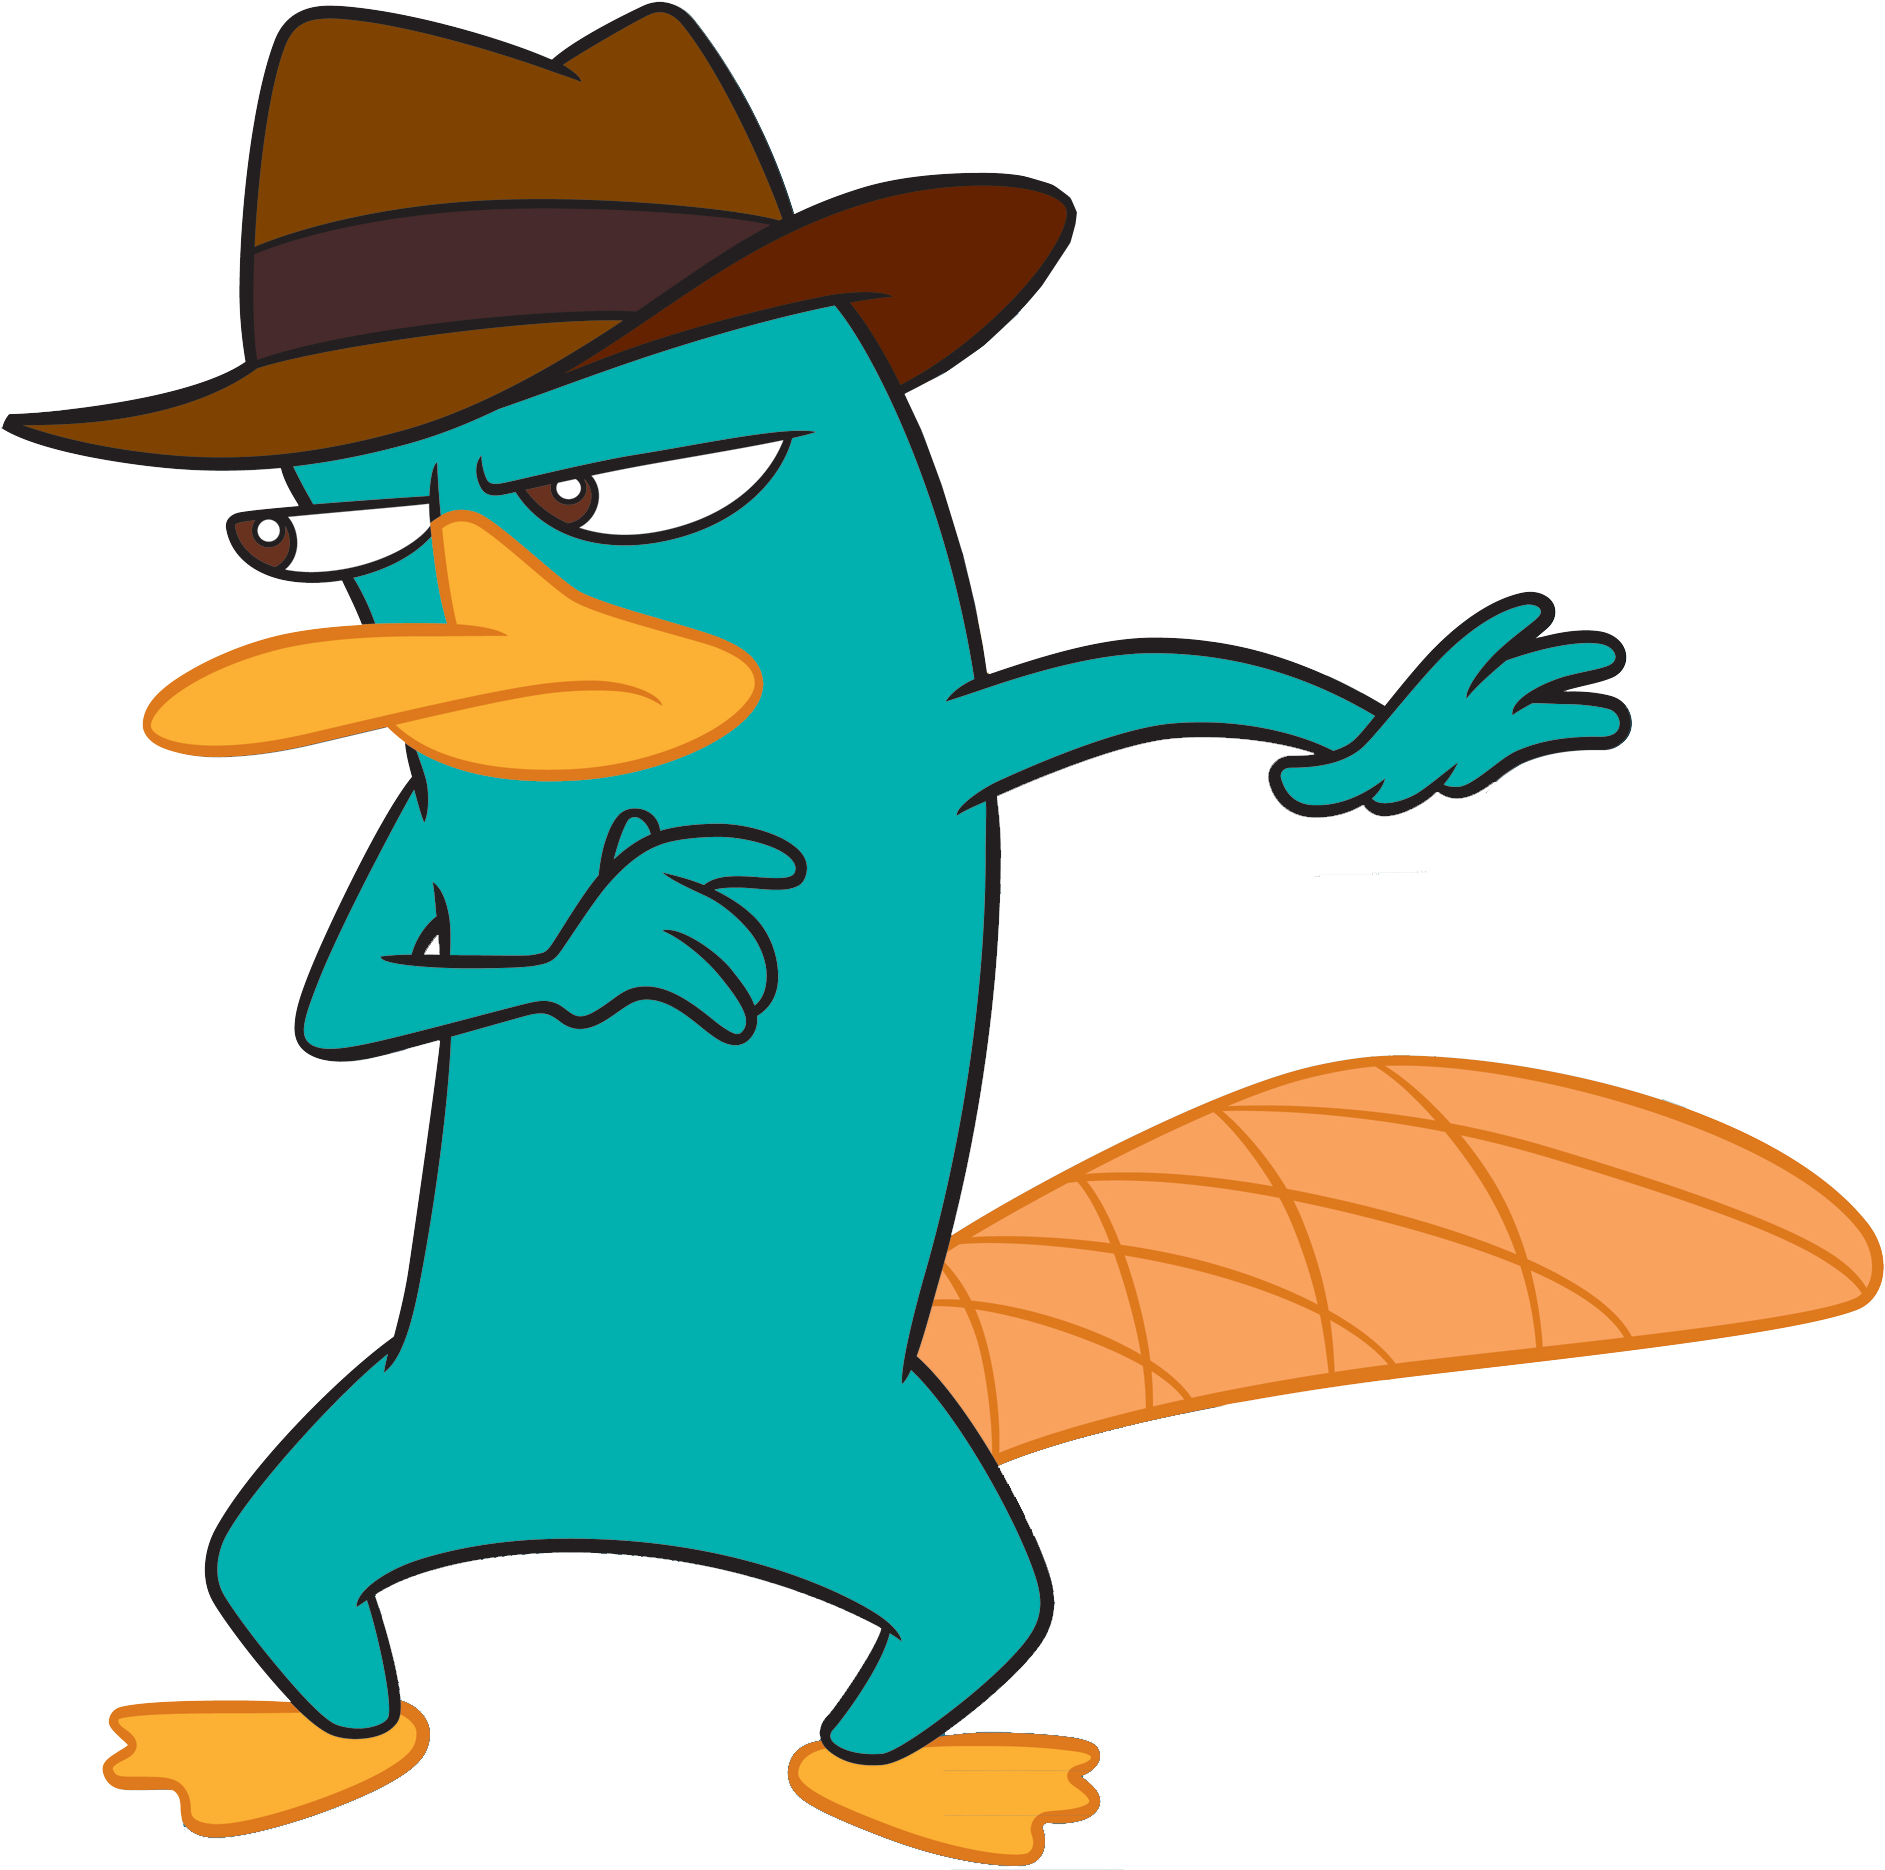 Perry The Platypus Agent P For Kids - Secret Agent Perry The Platypus (2000x2000)